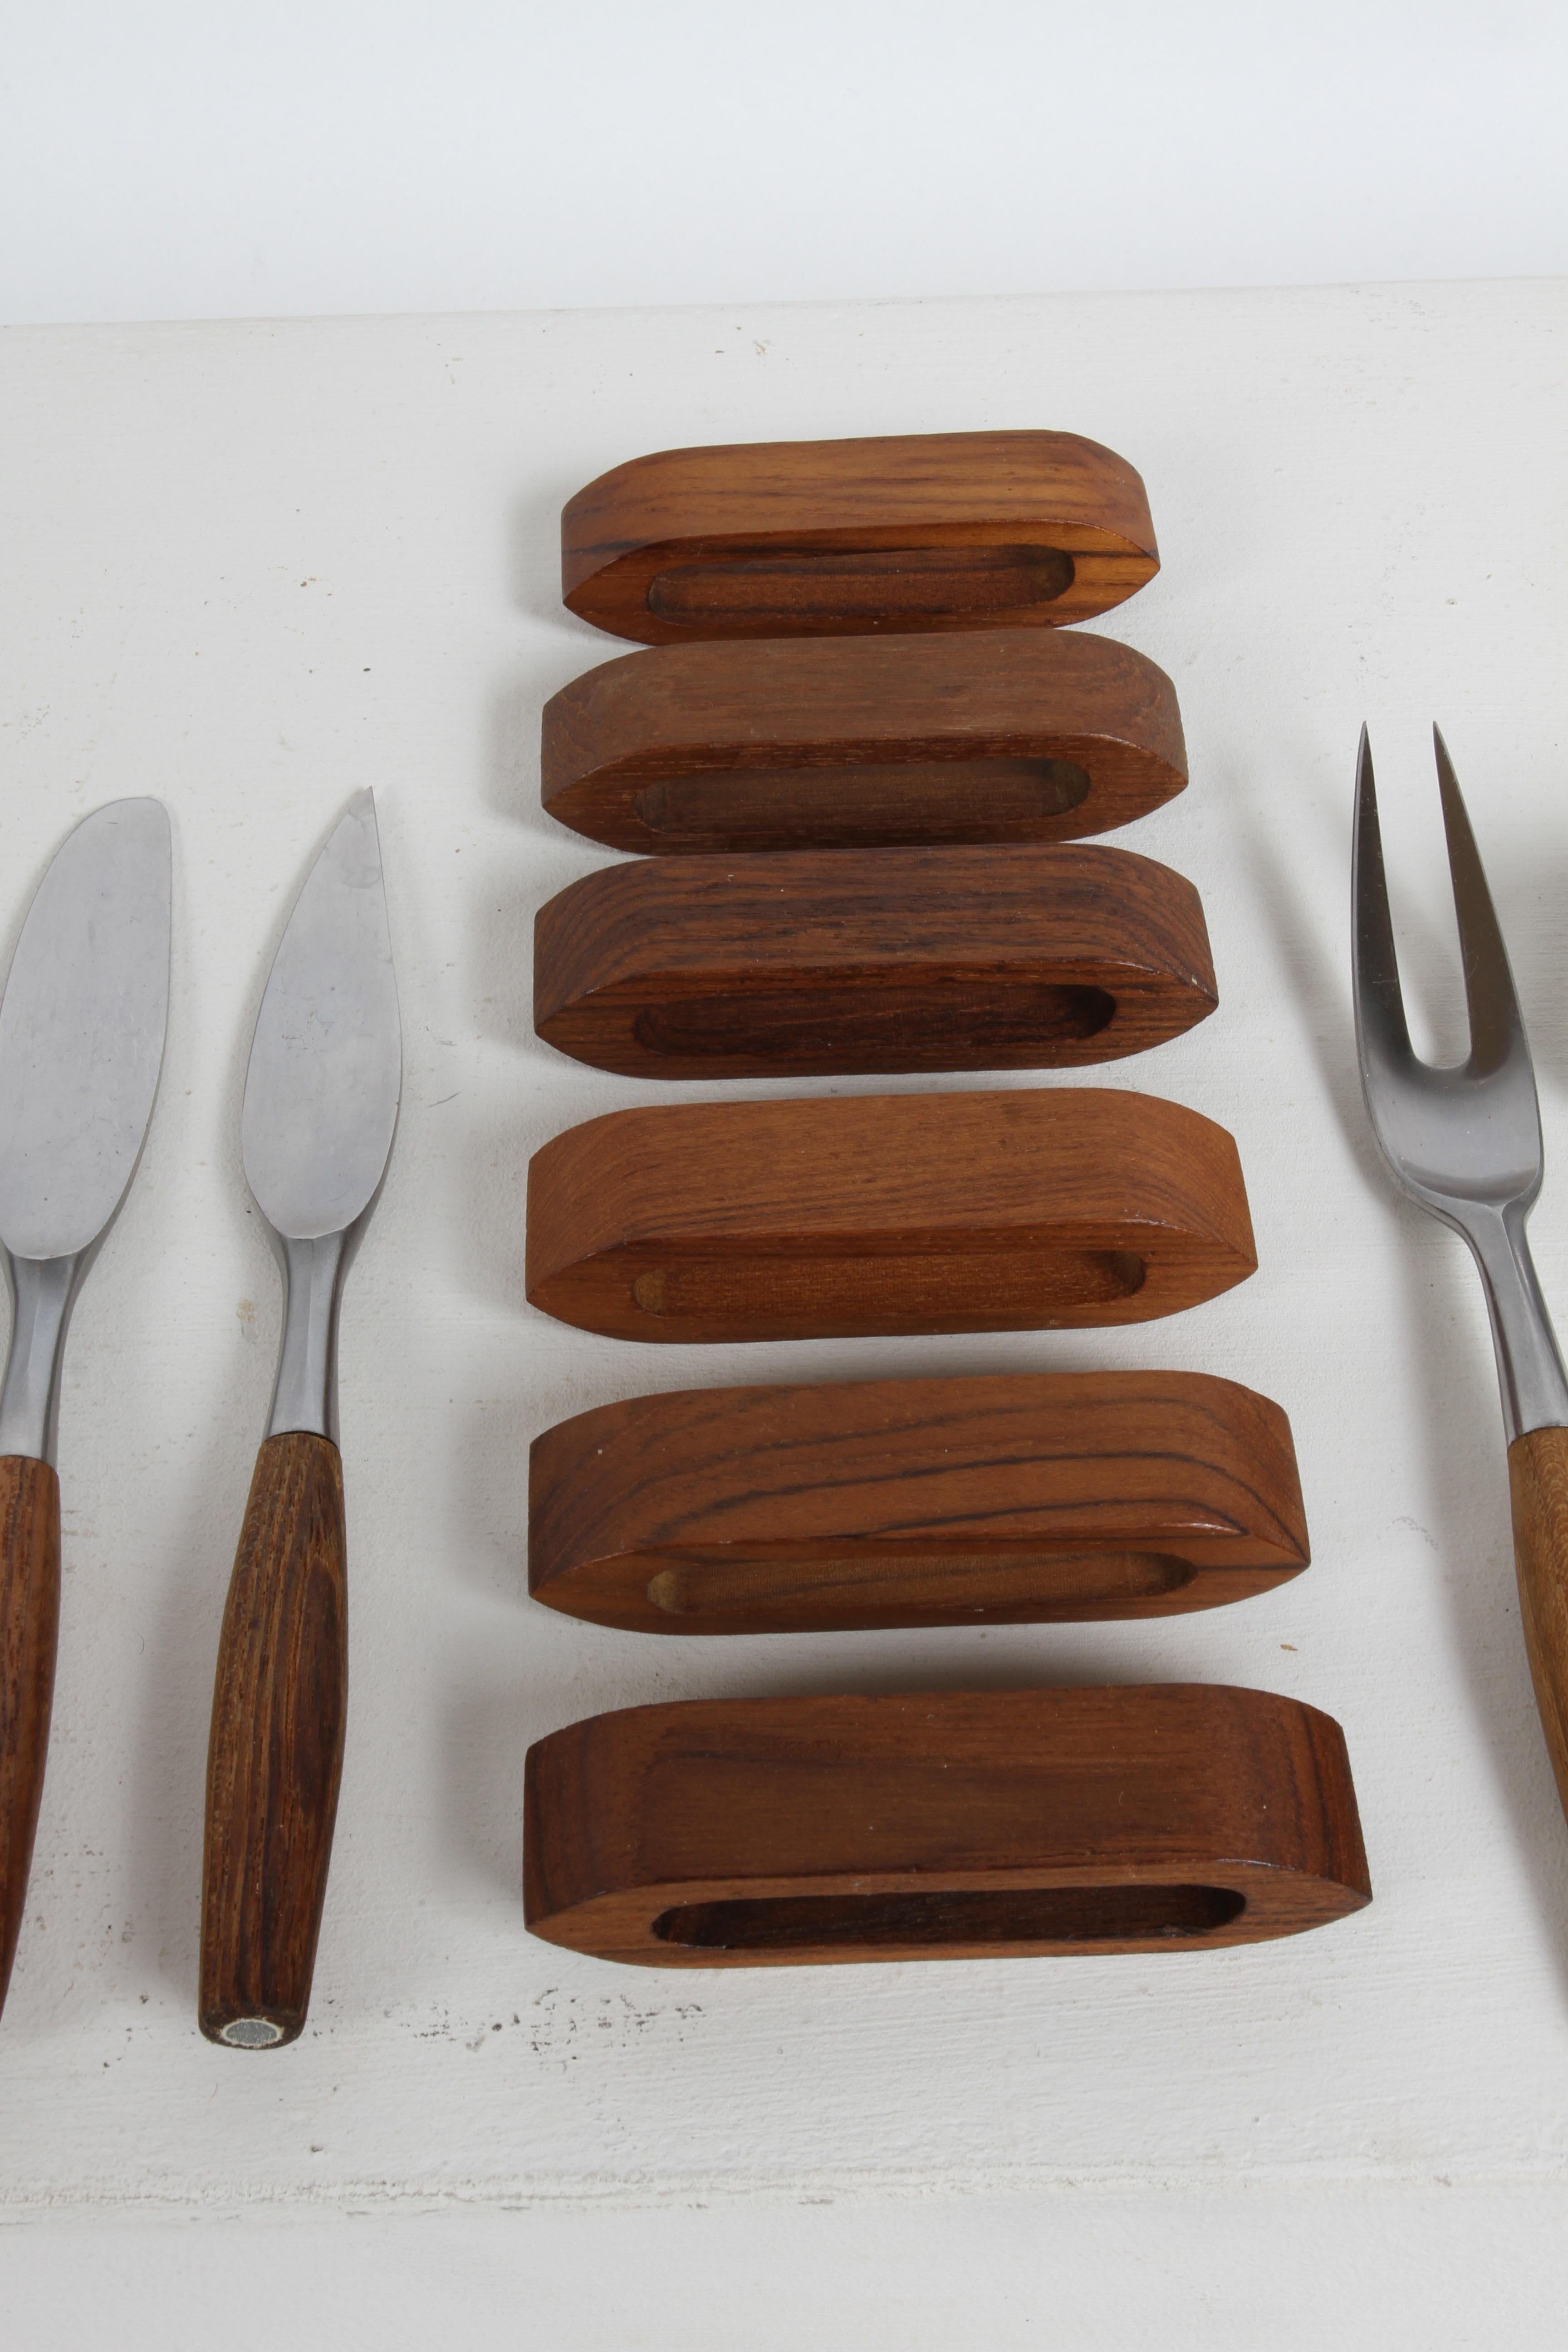 Vintage JHQ Dansk Fjord Flatware Service for 8-Teak Wood Handle 92-Piece Set  In Good Condition For Sale In St. Louis, MO